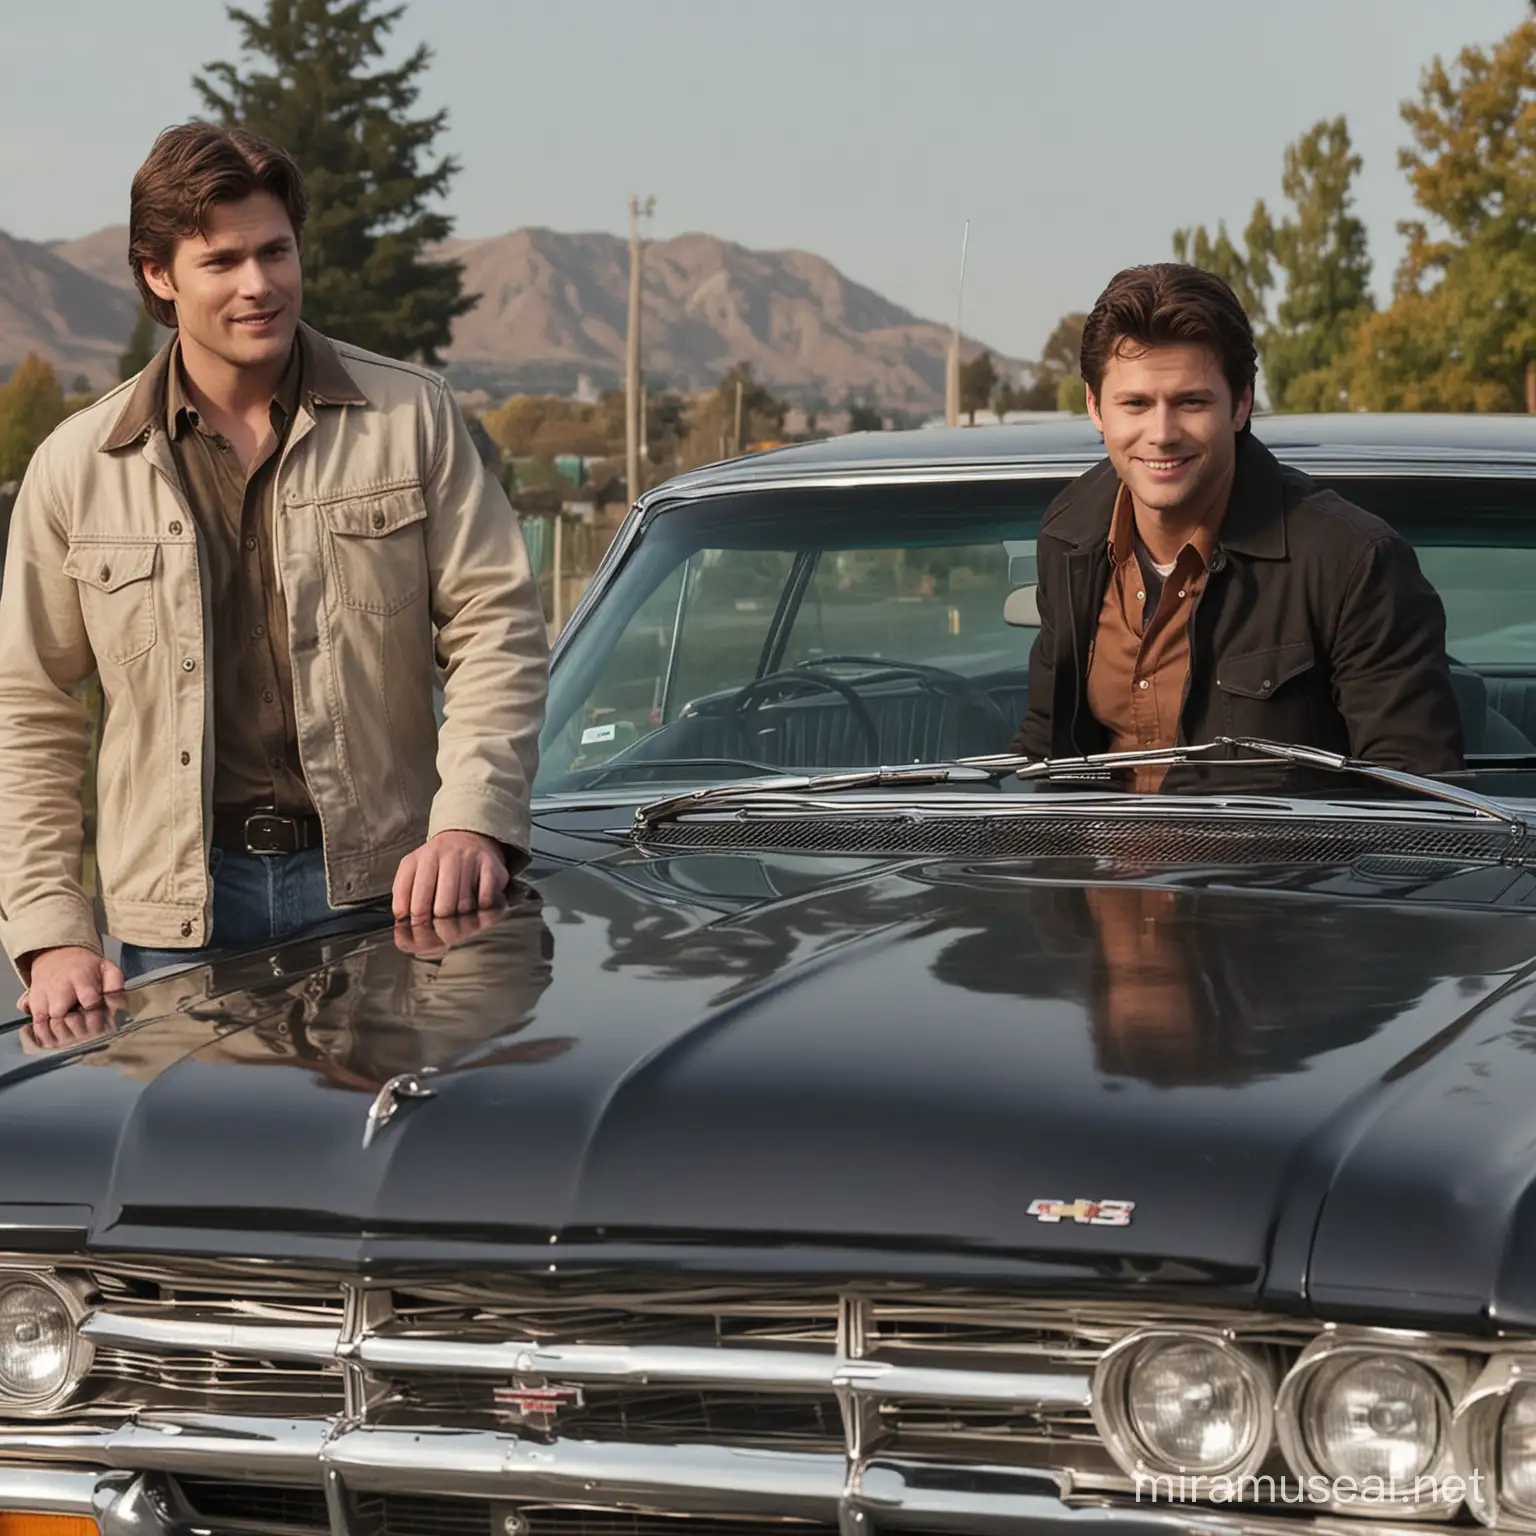 There are Dean Winchester, Sam Winchester and Castiel in front of the Impala Chevrolet 1967 black on Supernatural Tv Series. They are on the road. Dean Wichester leans against Impala Chevrolet 1967 black. There is a young woman with wavy hair between Sam Wichester and Castiel. Sam Wichester and a young woman with wavy hair smiles at the camera. The camera takes them from a distance.